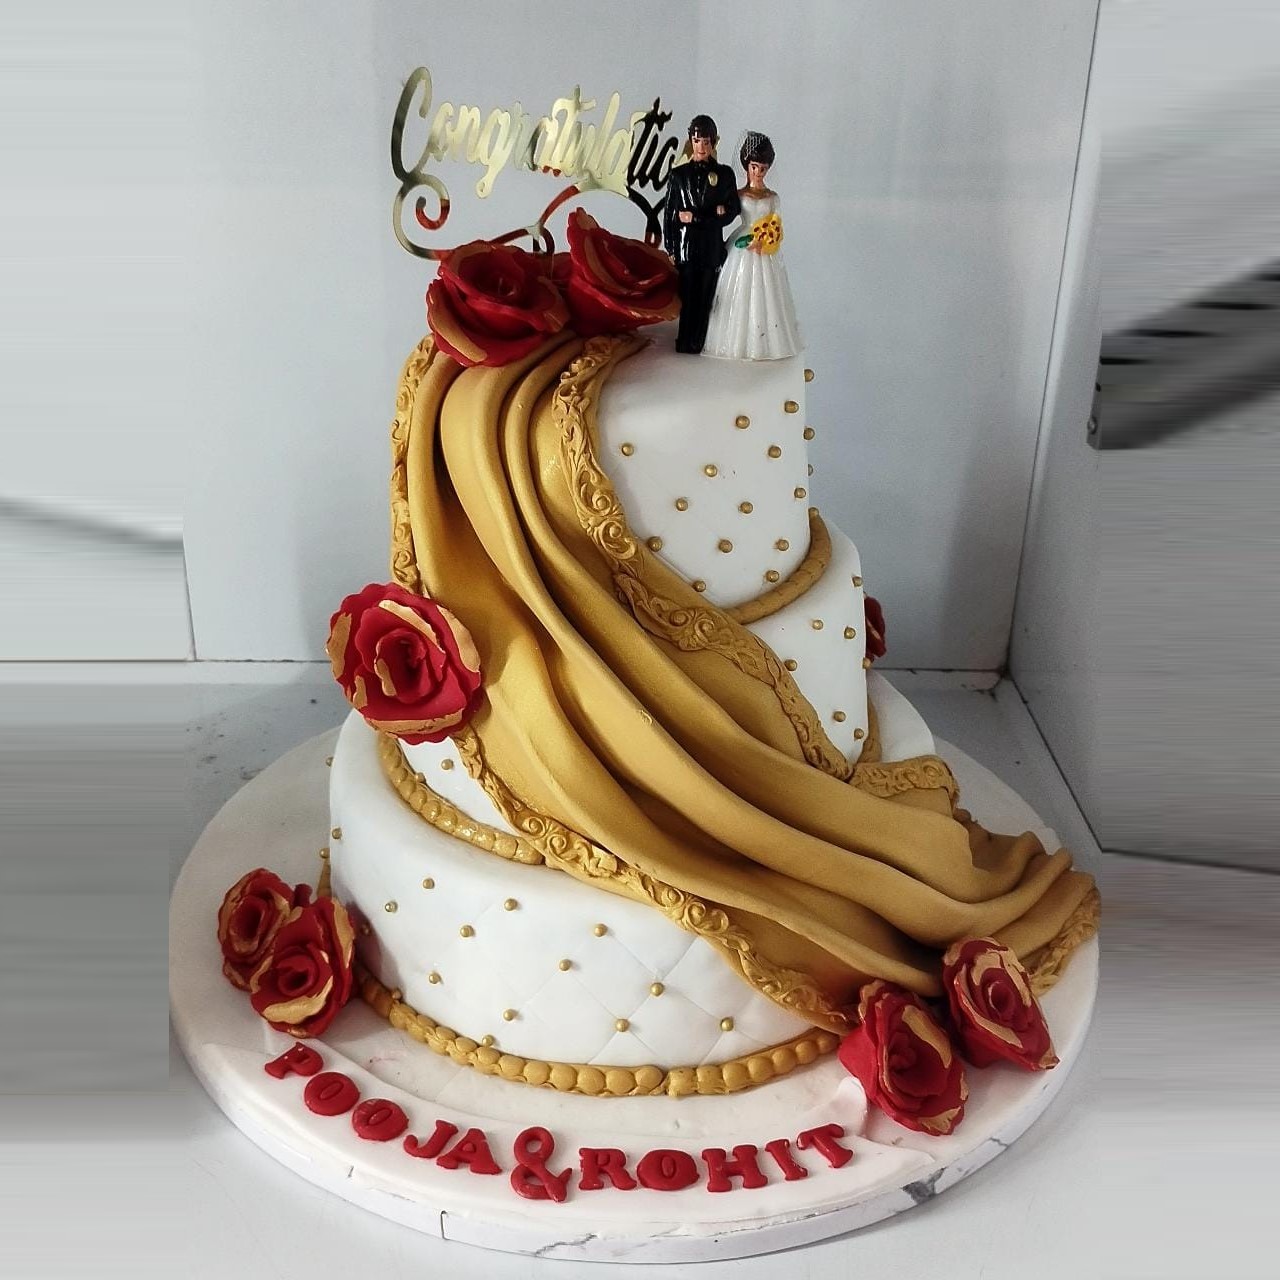 10 Traditional Cakes from Around The World | Times of India